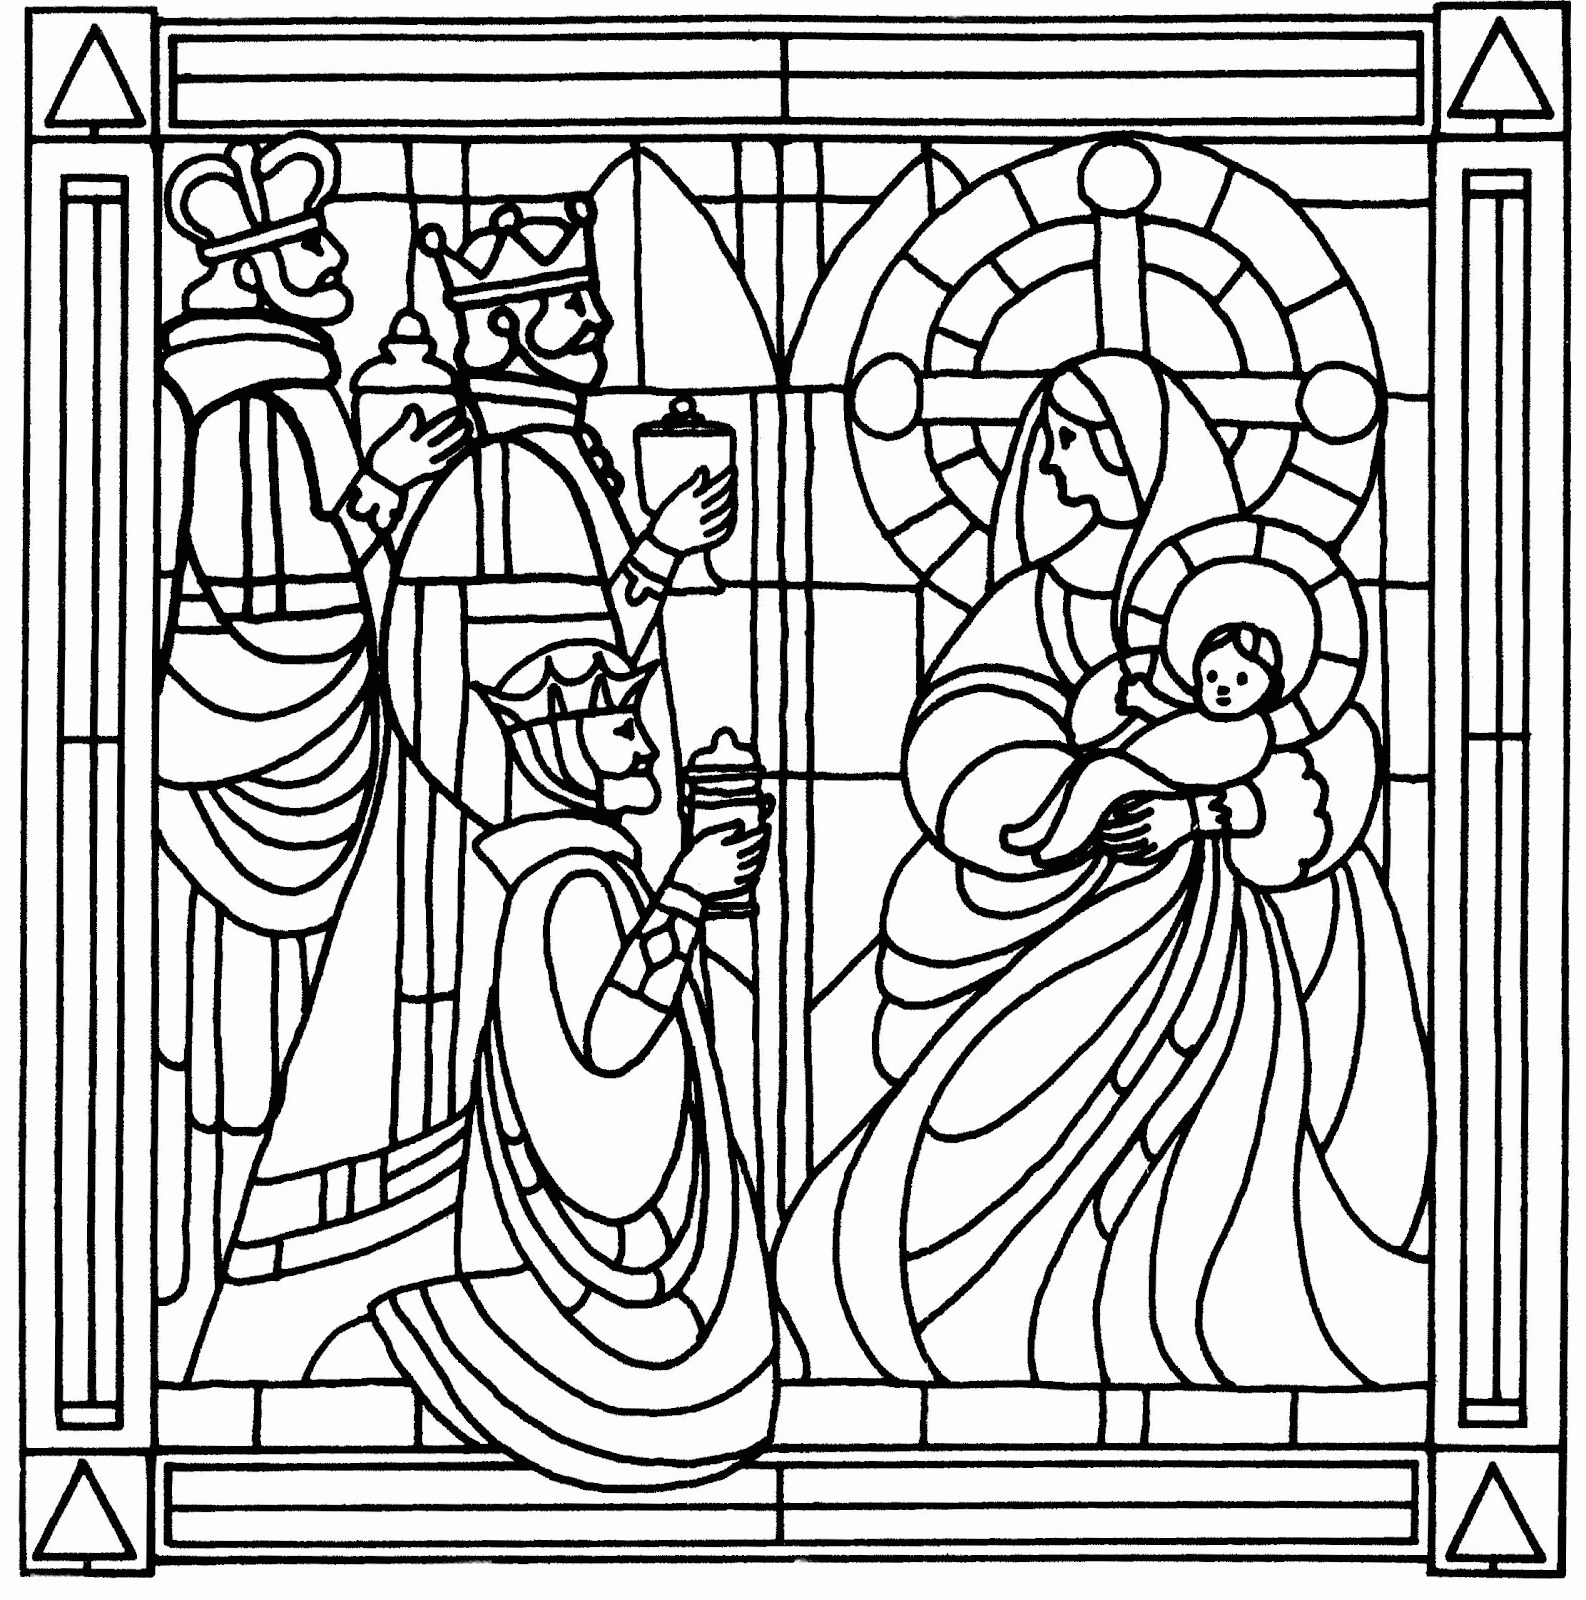 Free Stained Glass Coloring Pages: 40 Collections - VoteForVerde.com